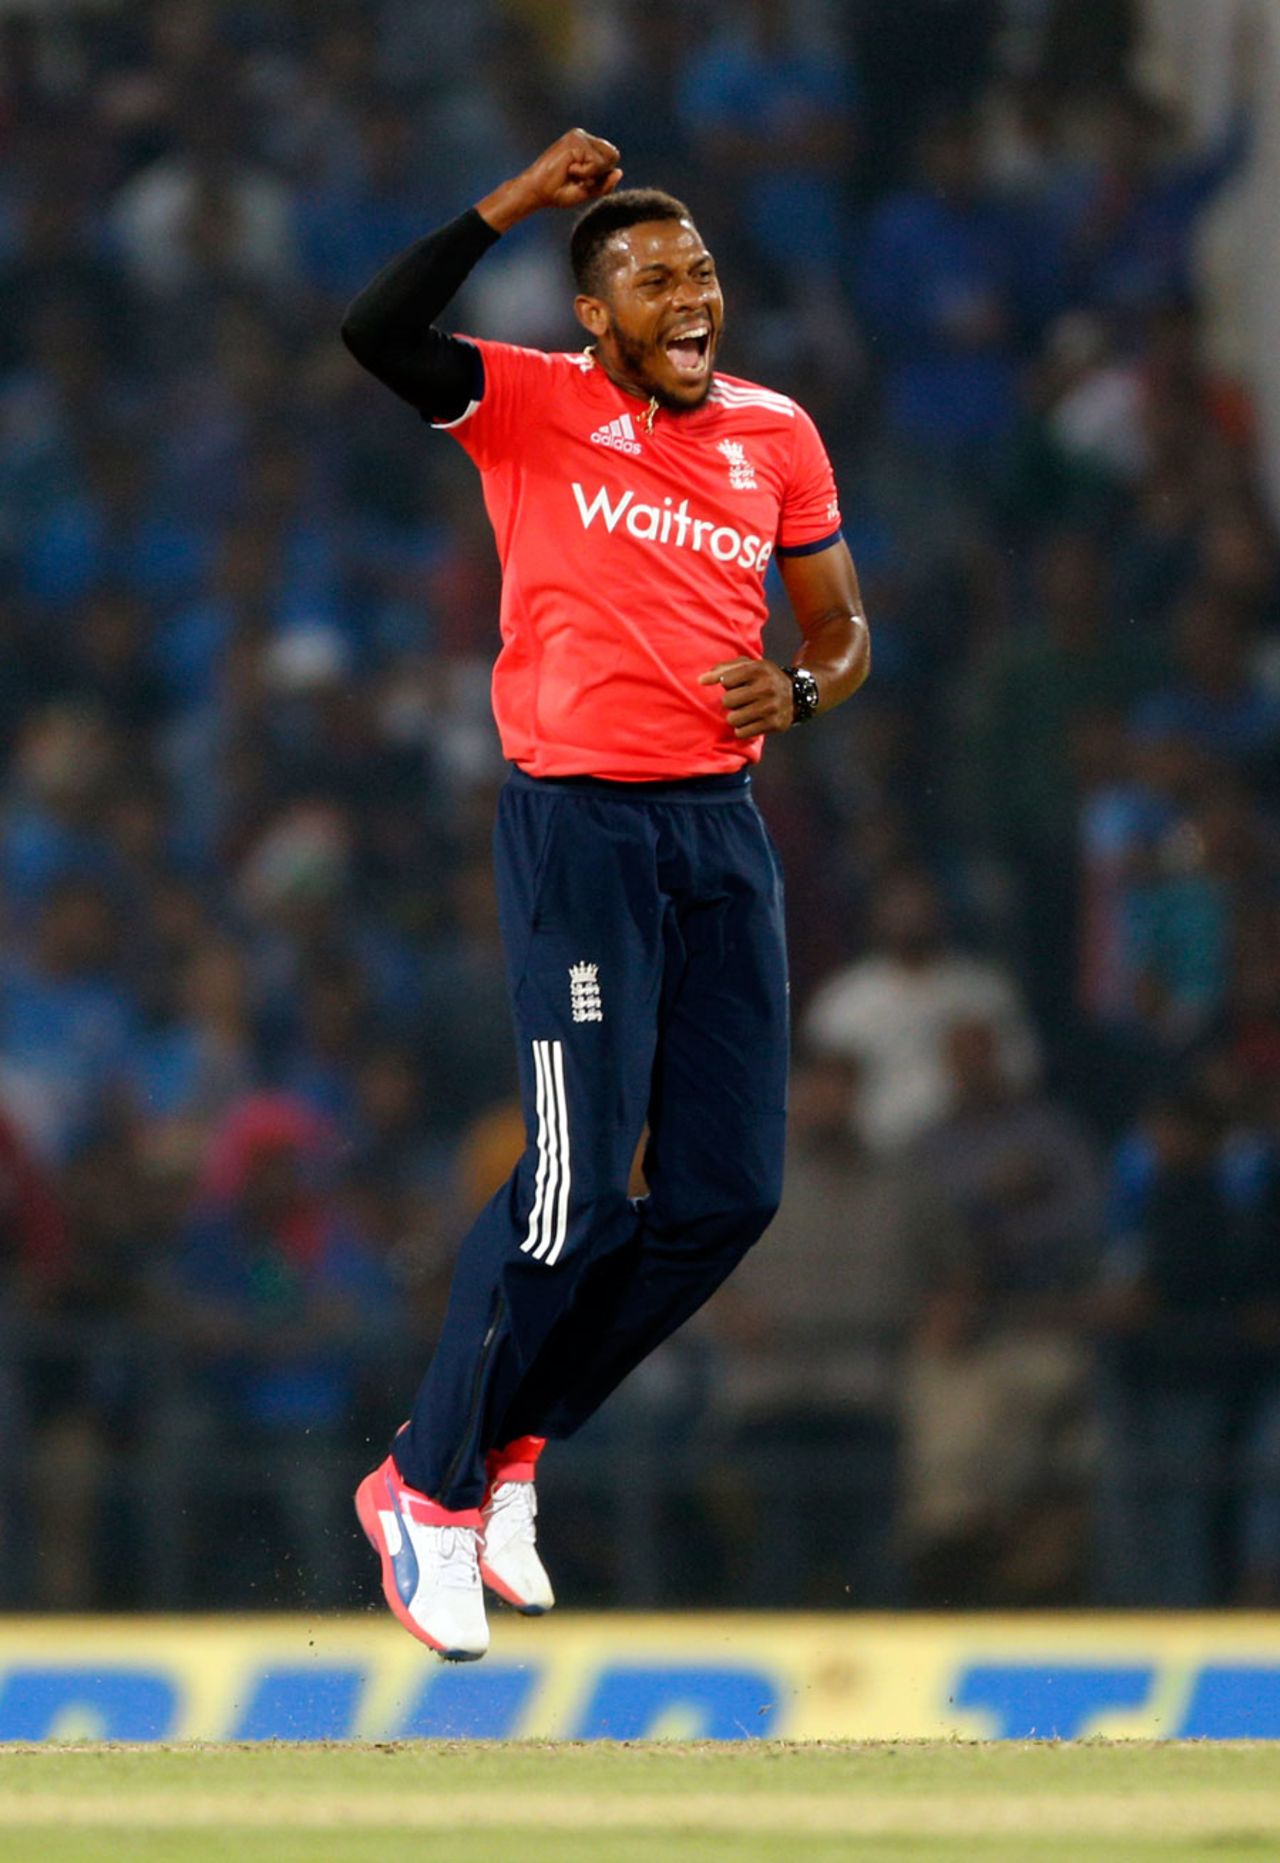 Chris Jordan is pumped up after taking a wicket, India v England, 2nd T20, Nagpur, January 29, 2017